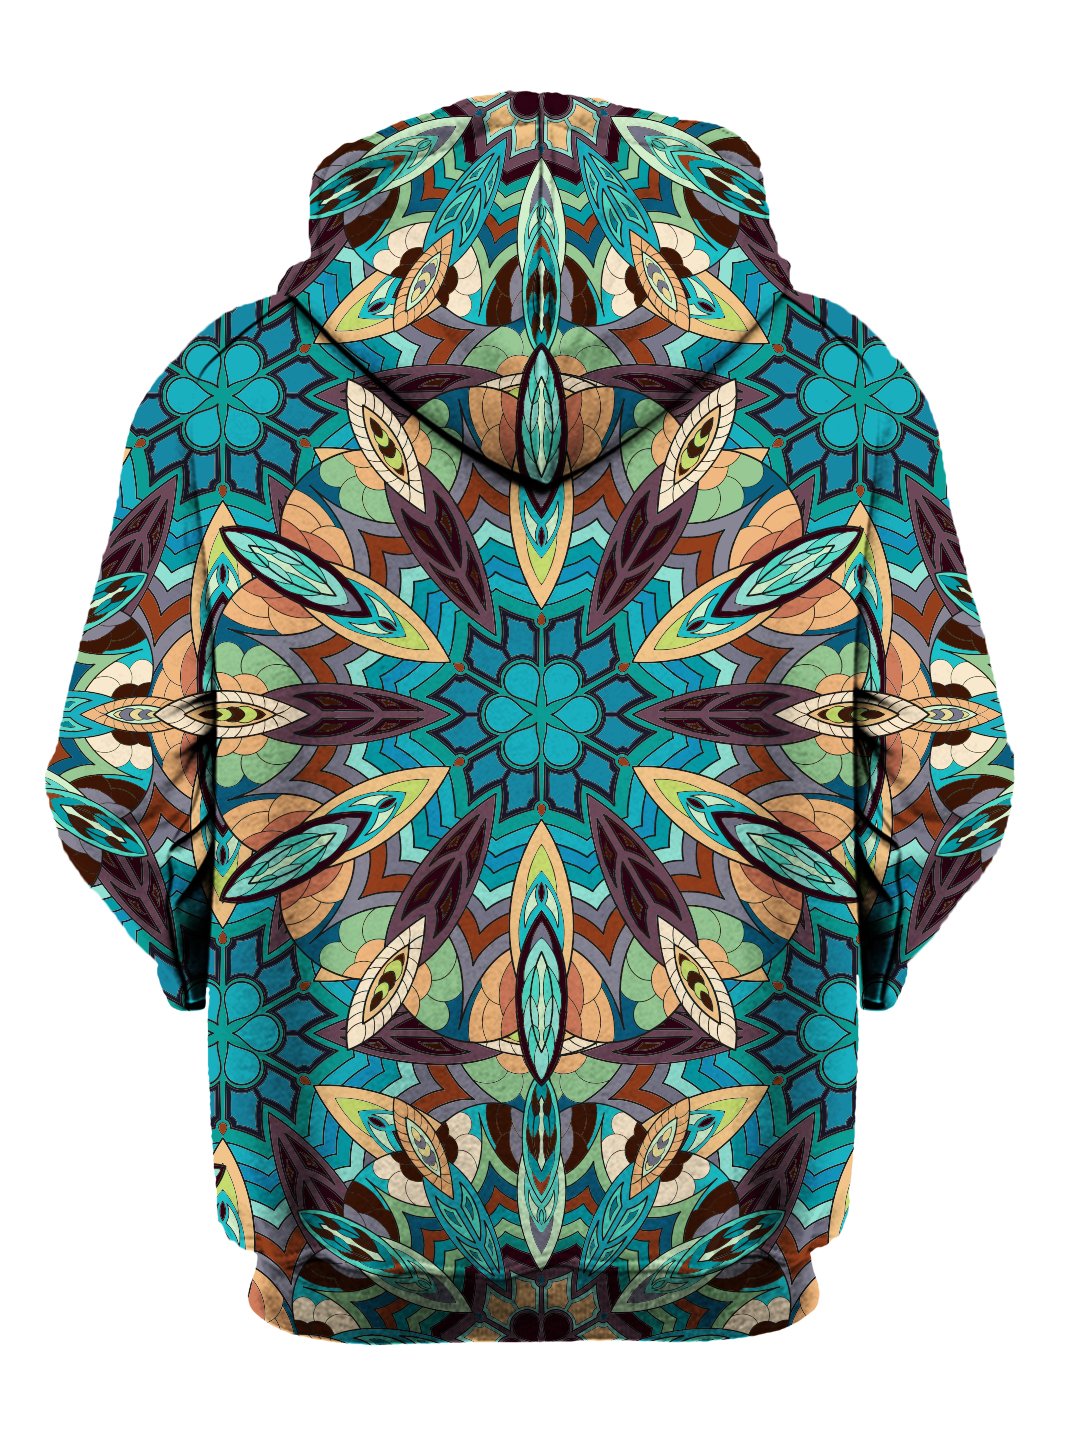 Back view of all over print psychedelic sacred geometry hoody by Gratefully Dyed Apparel. 